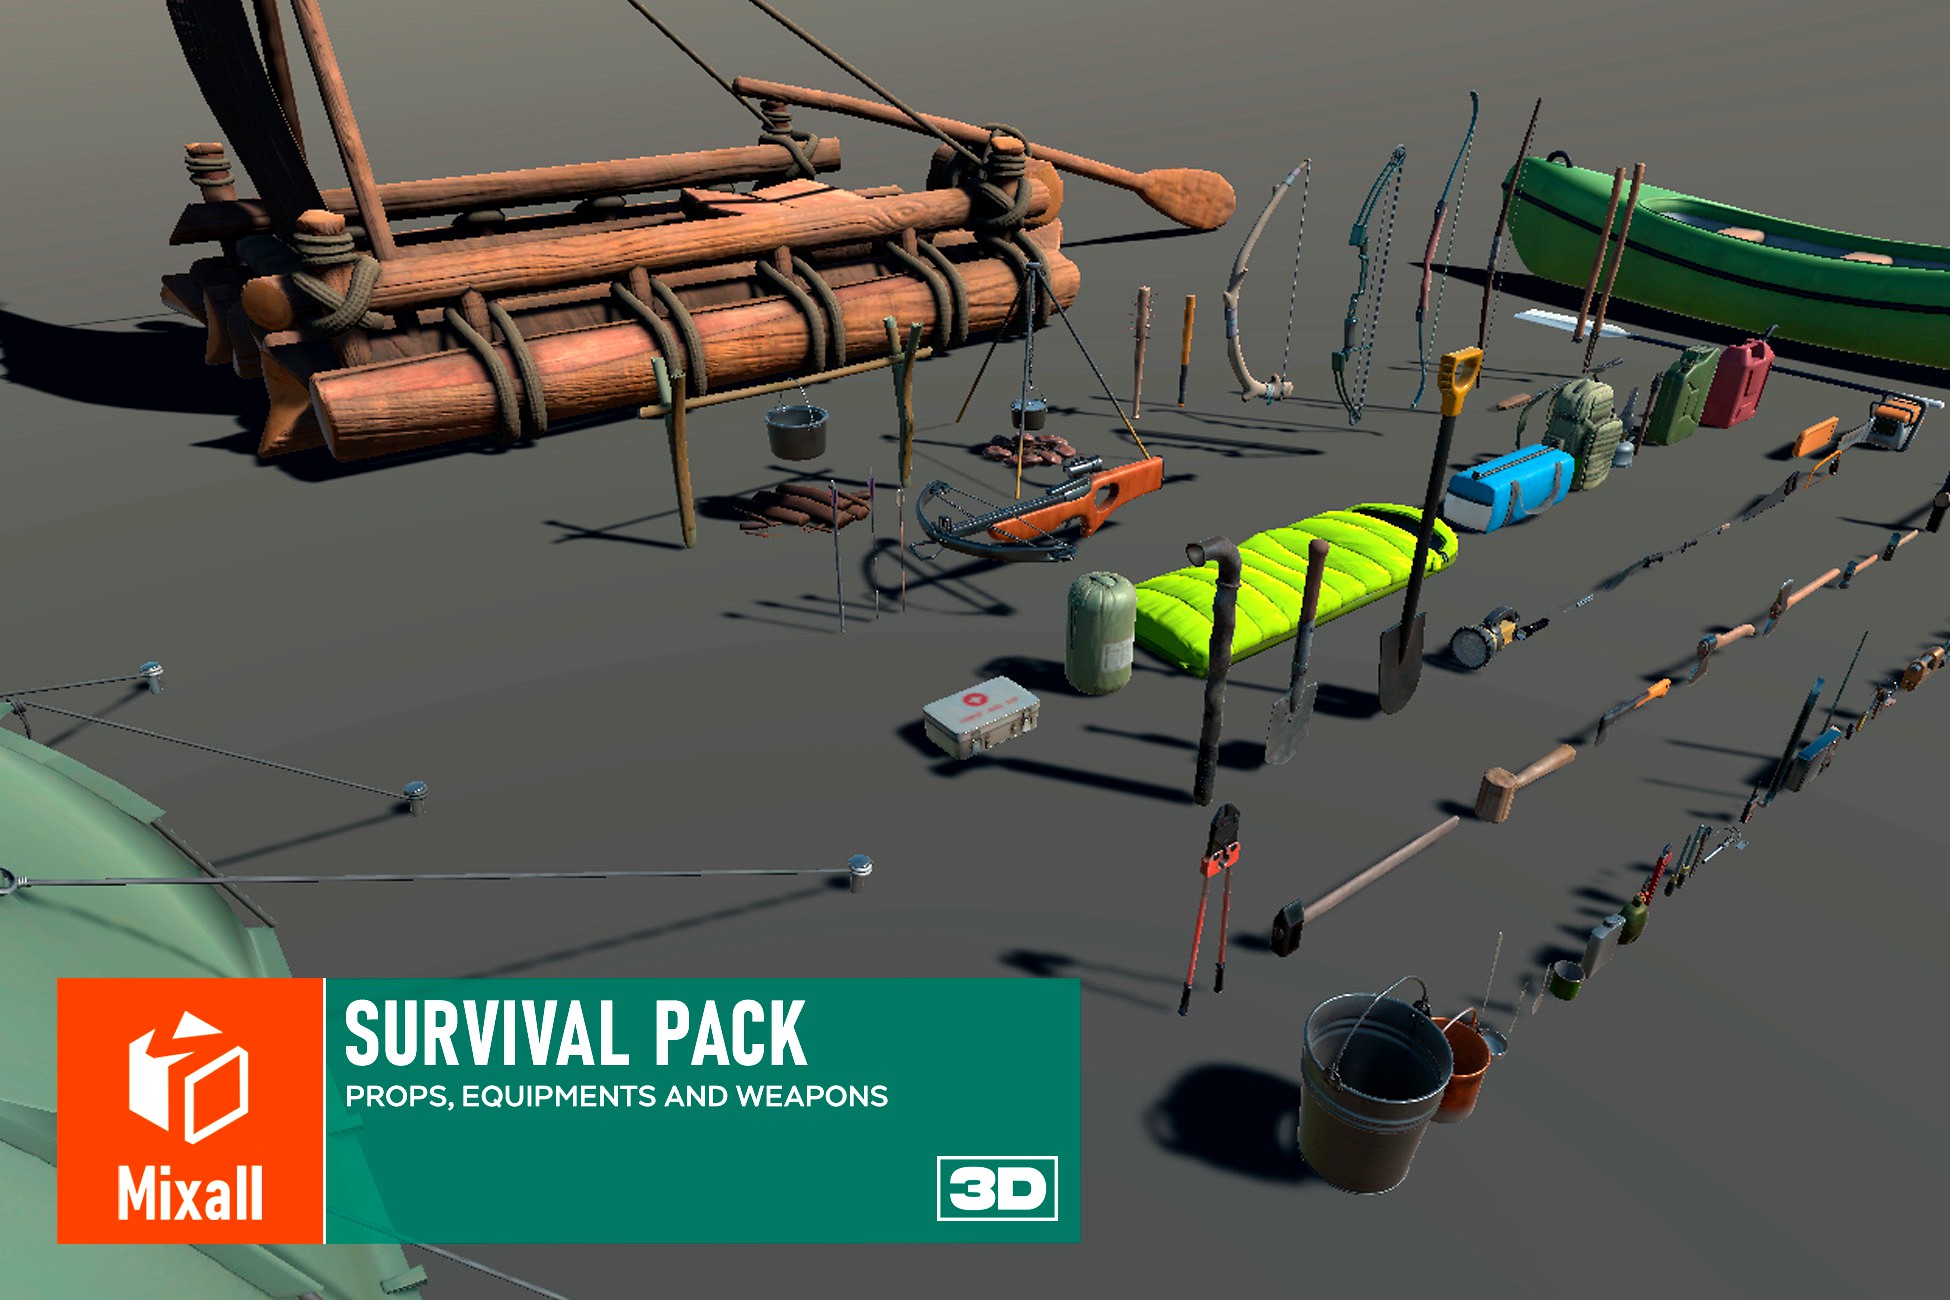 Survival pack - props, equipments and weapons